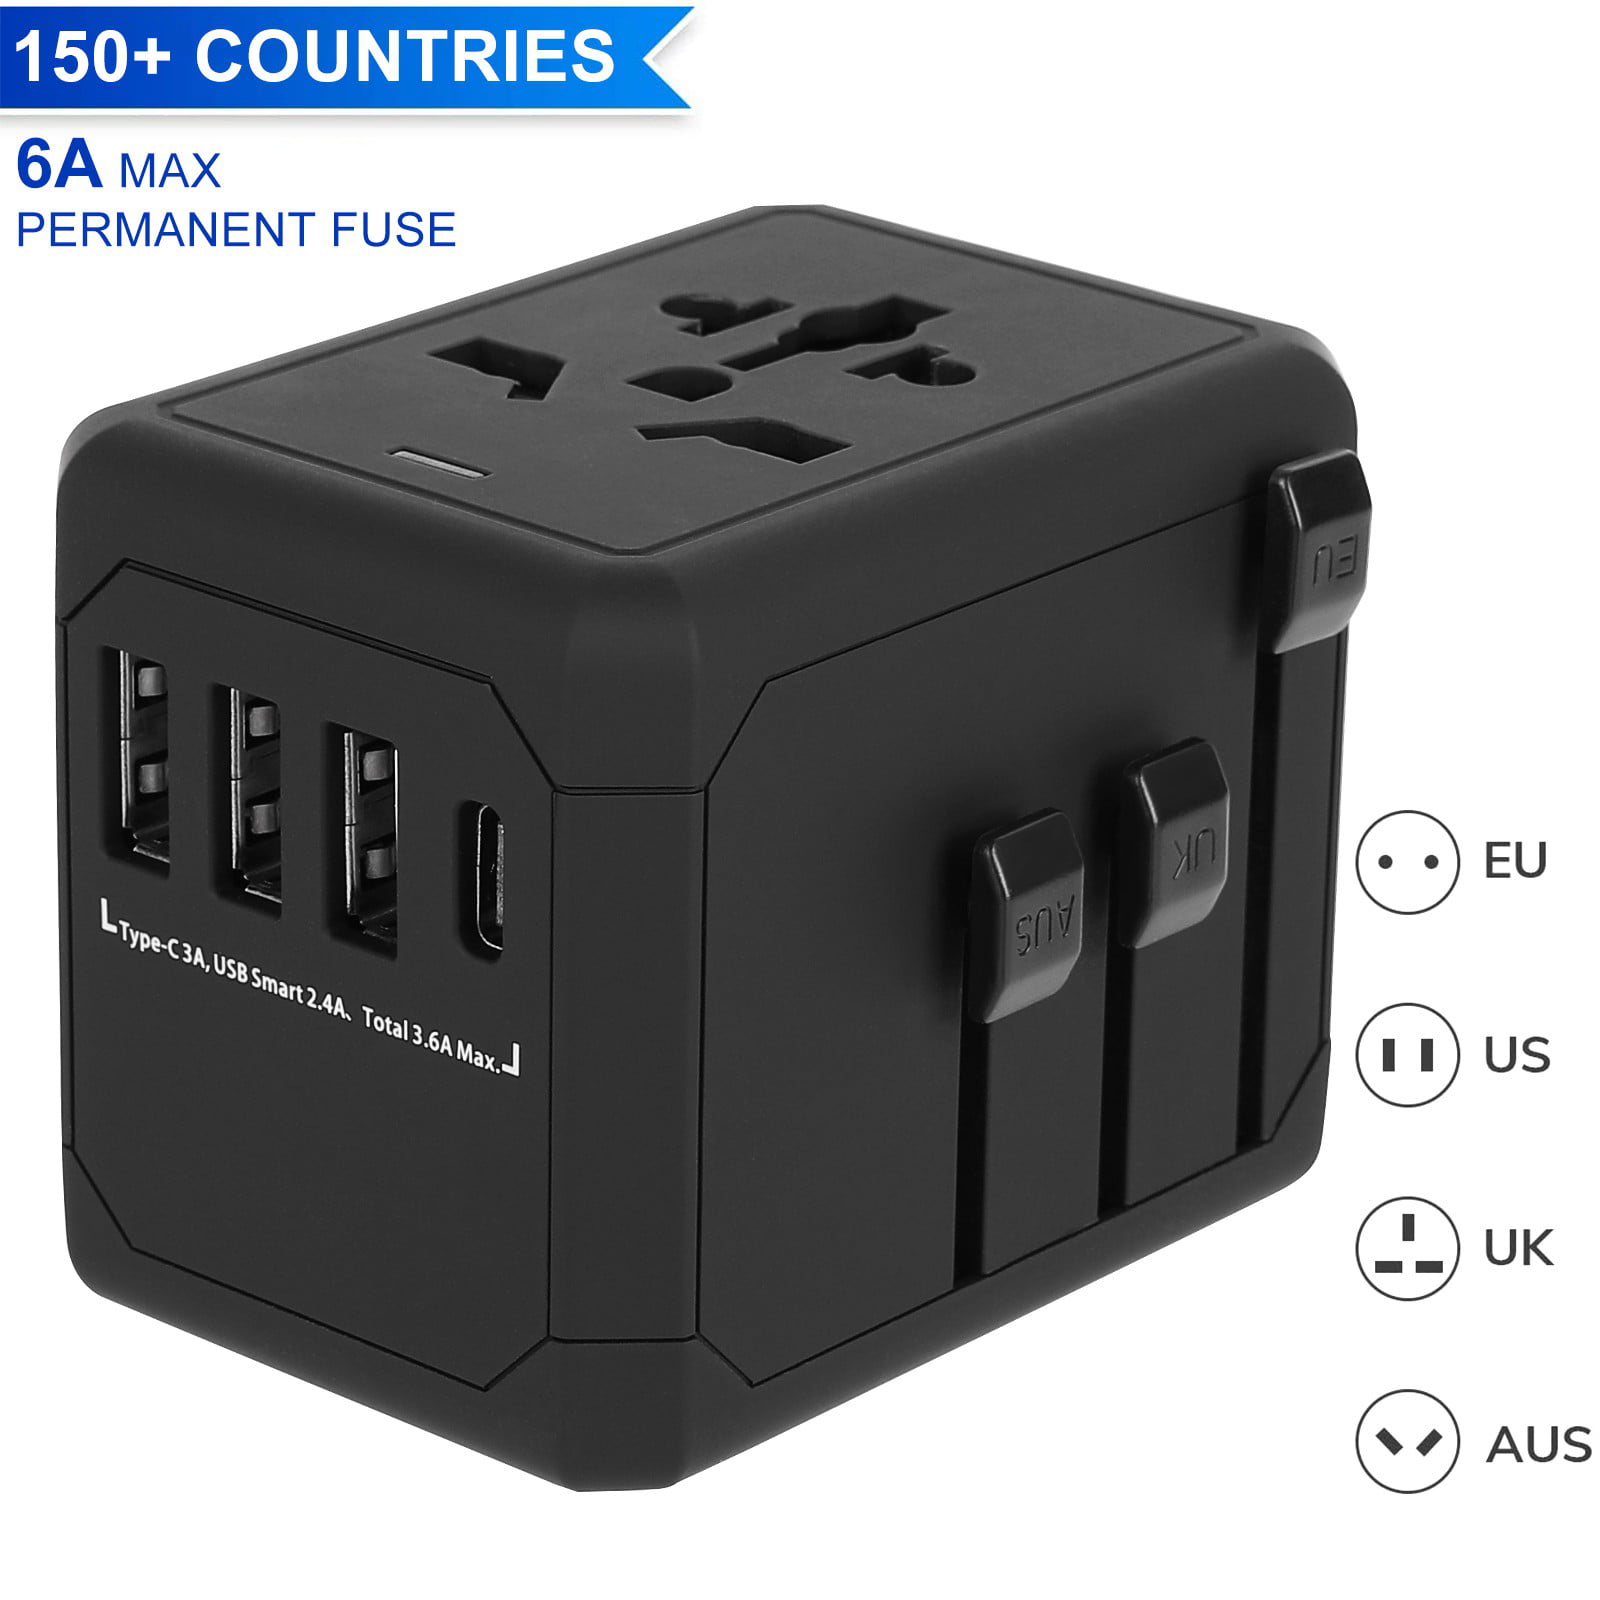 Travel Adapter Universal International All-in-One Worldwide Travel Adaptor Wall Charger AC Power Plug Adapter Charger with Dual USB Port for USA UK EU AUS 